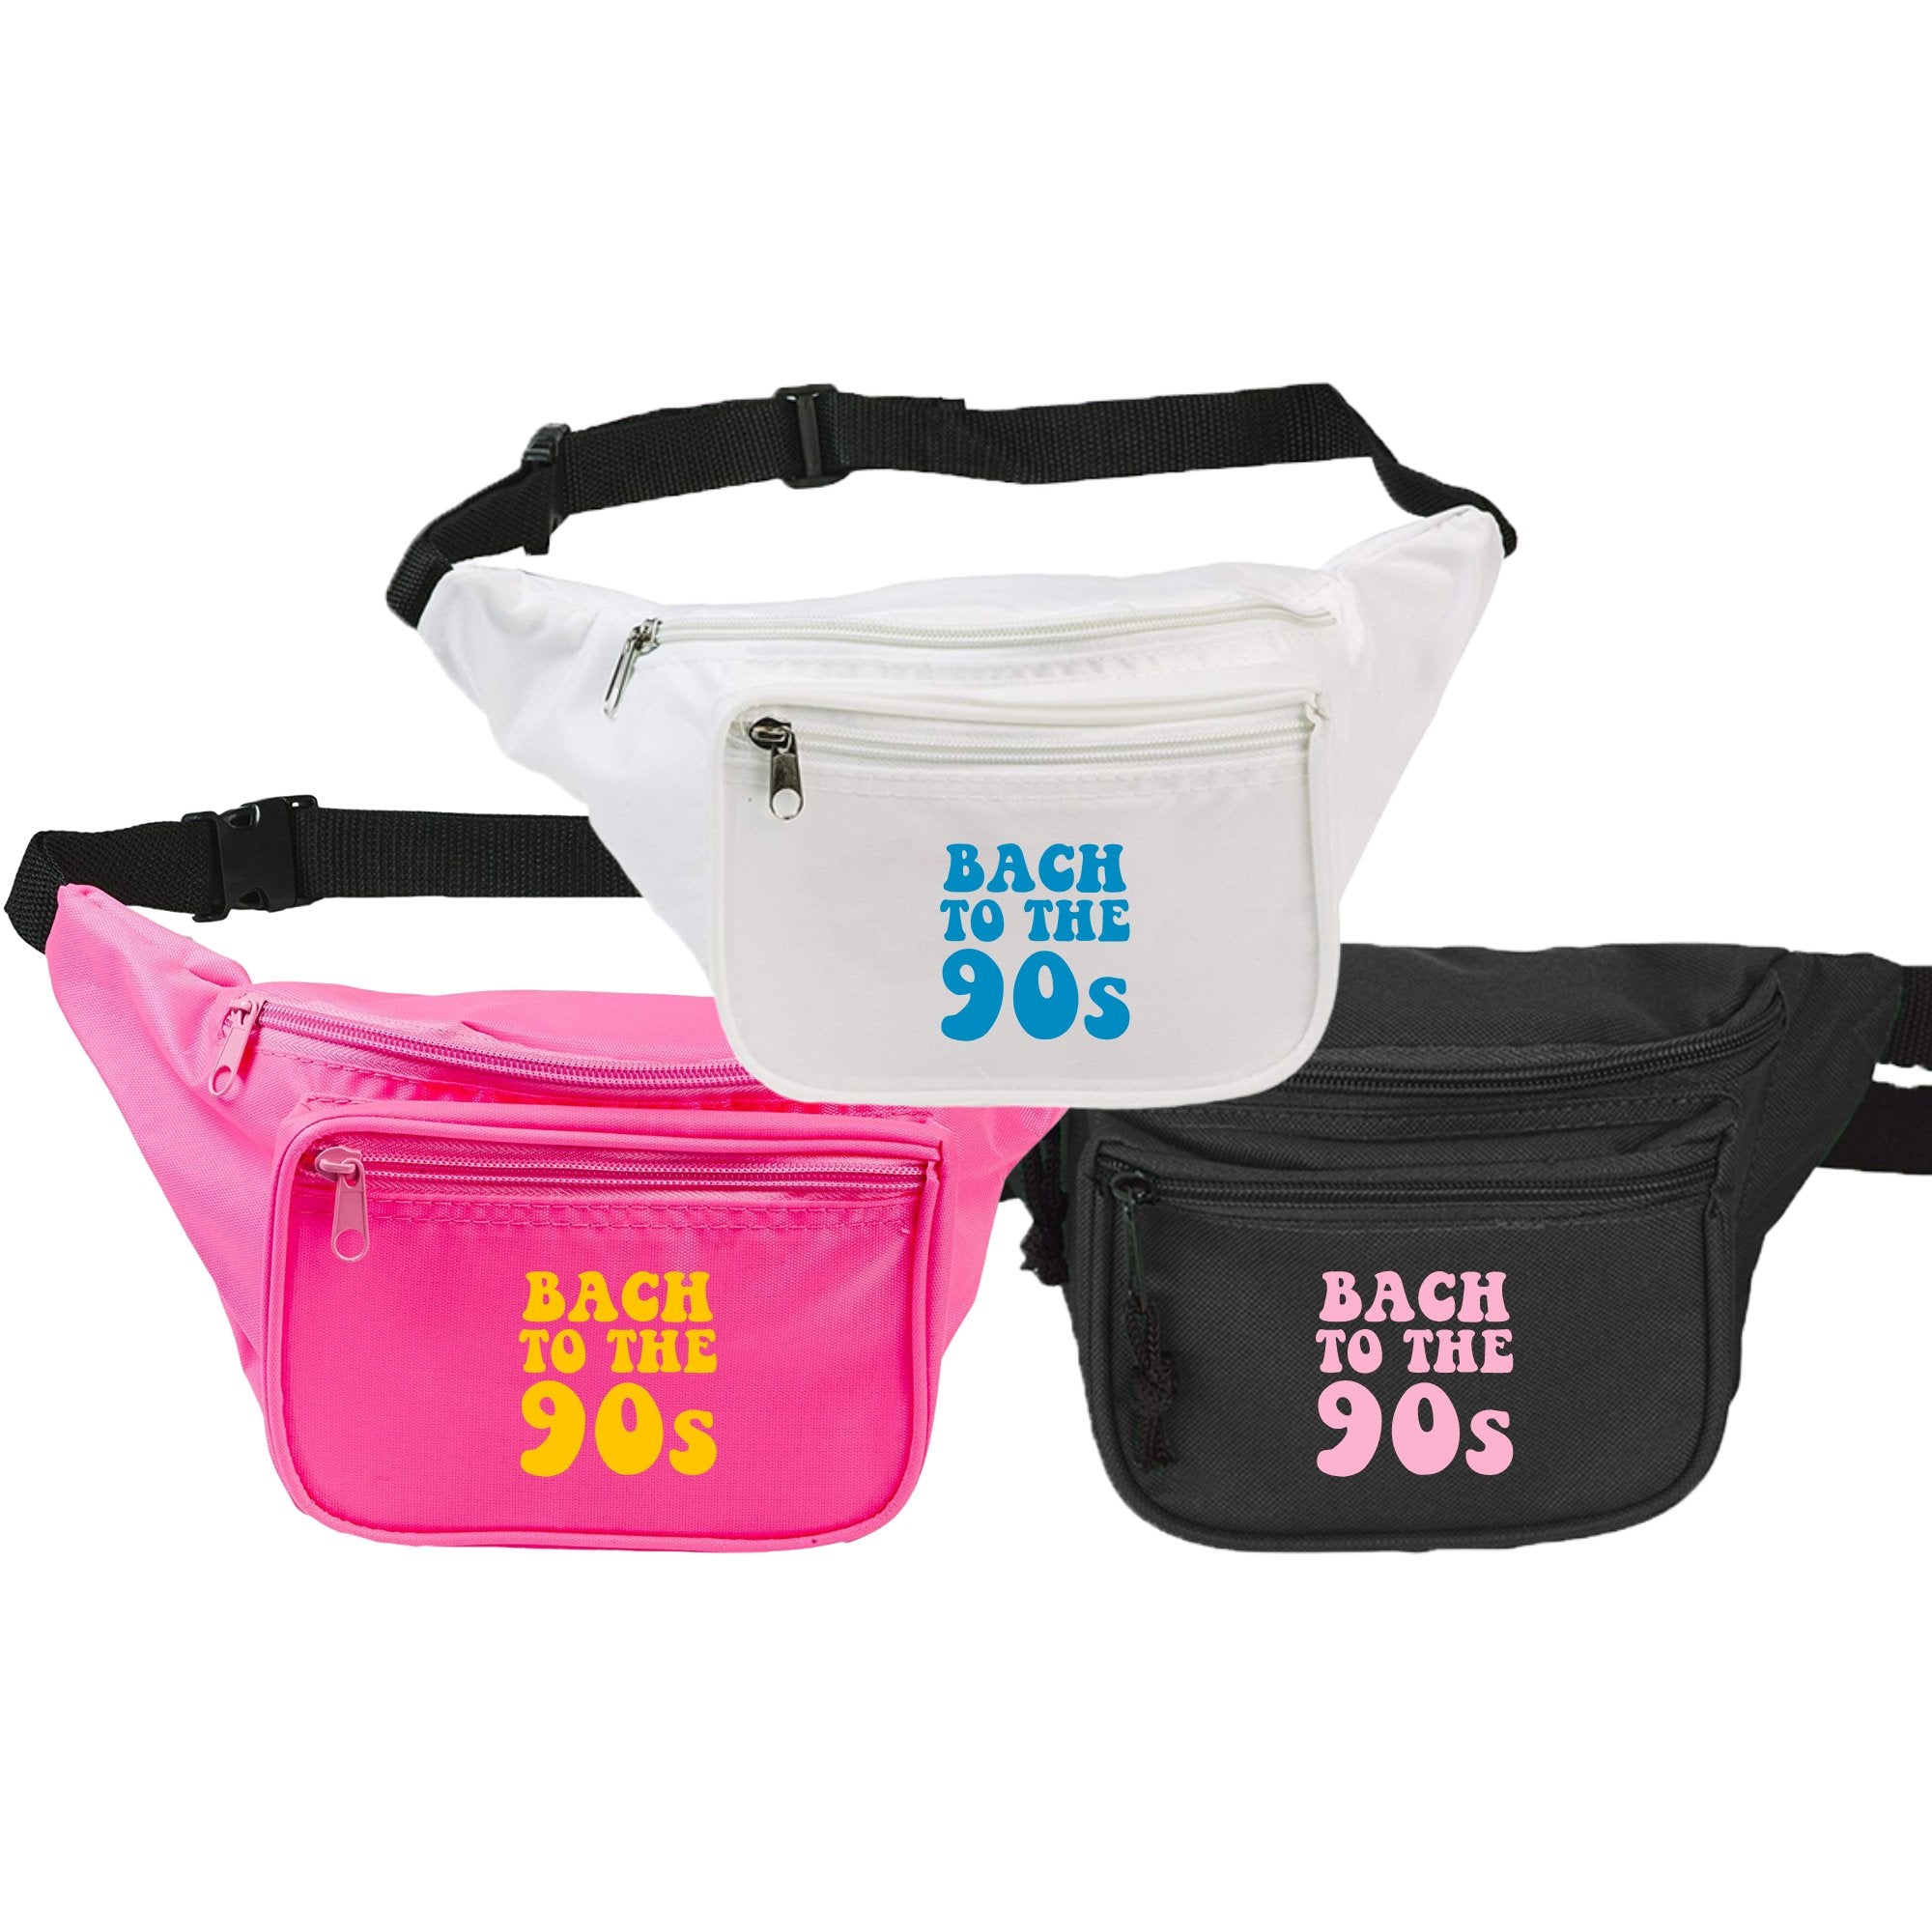 Bach To The 90s Fanny Pack - Sprinkled With Pink #bachelorette #custom #gifts